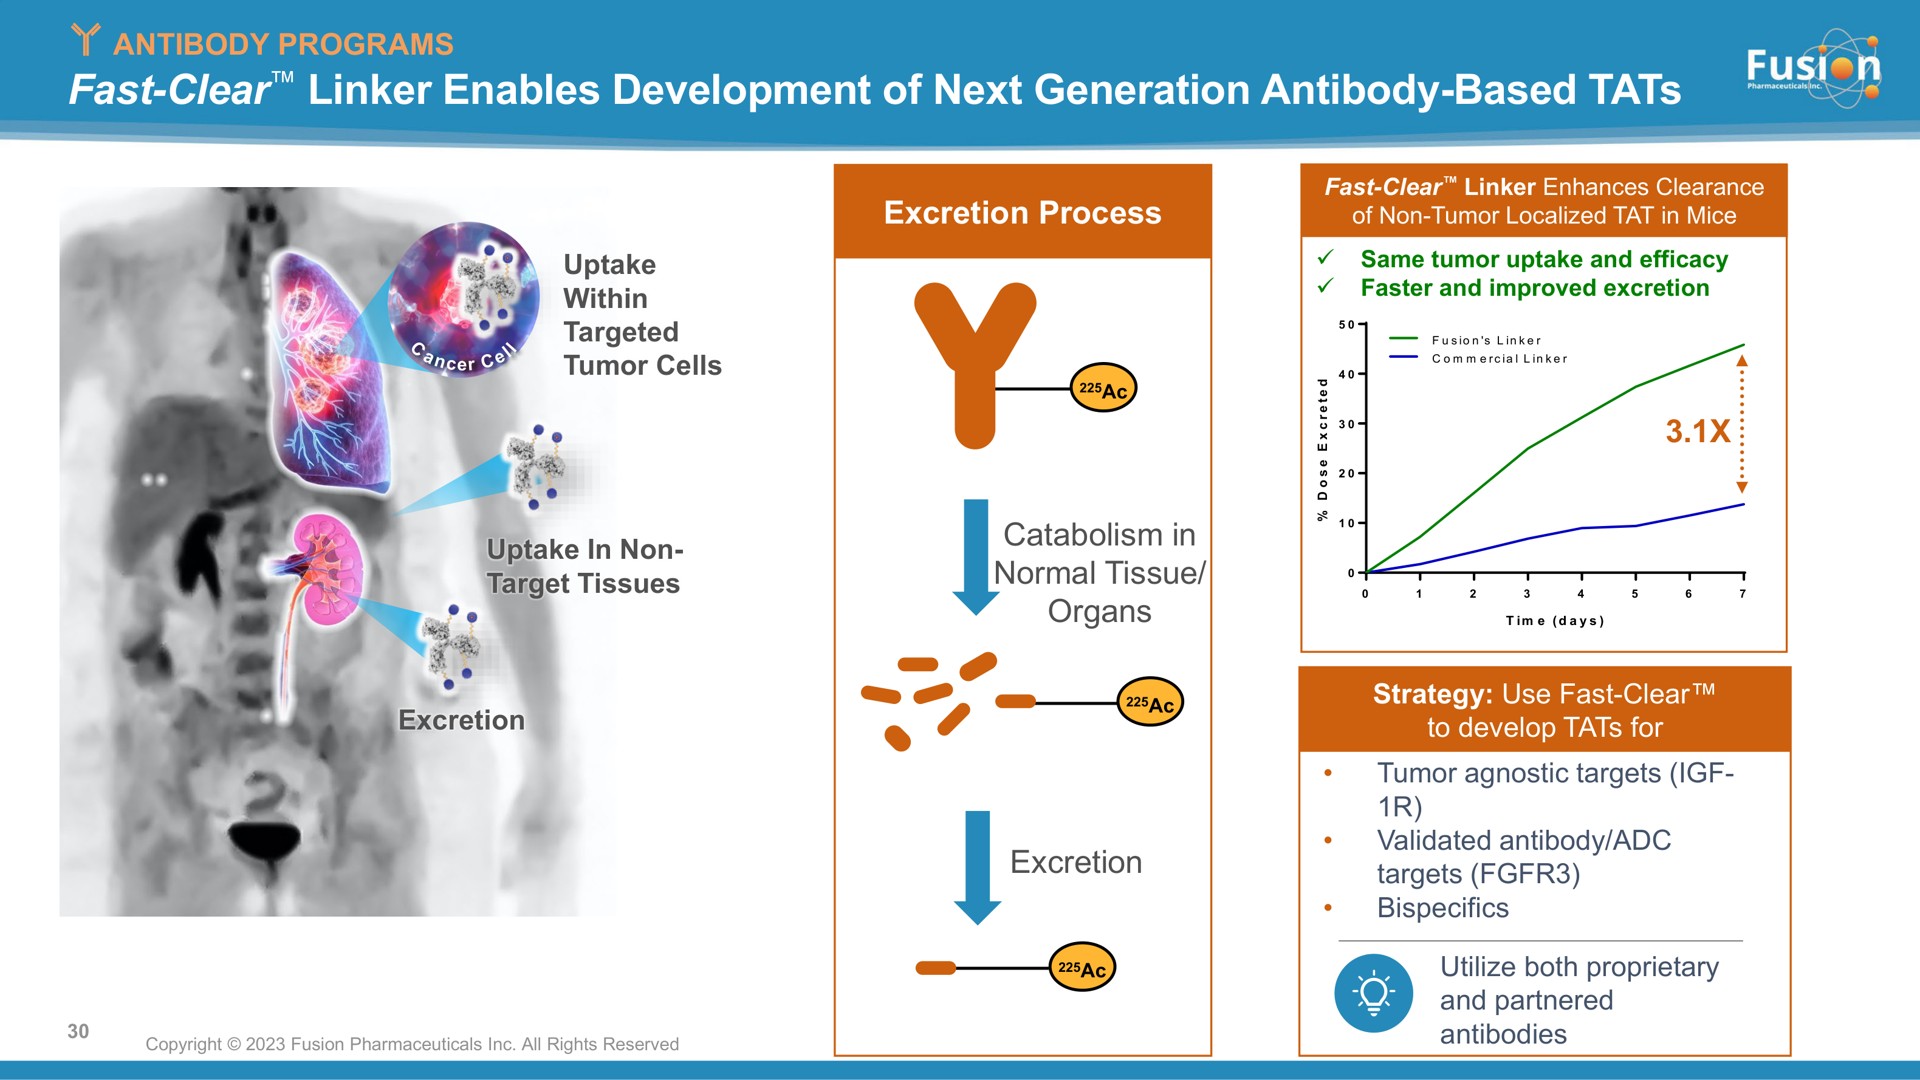 fast clear linker enables development of next generation antibody based tats | Fusion Pharmaceuticals